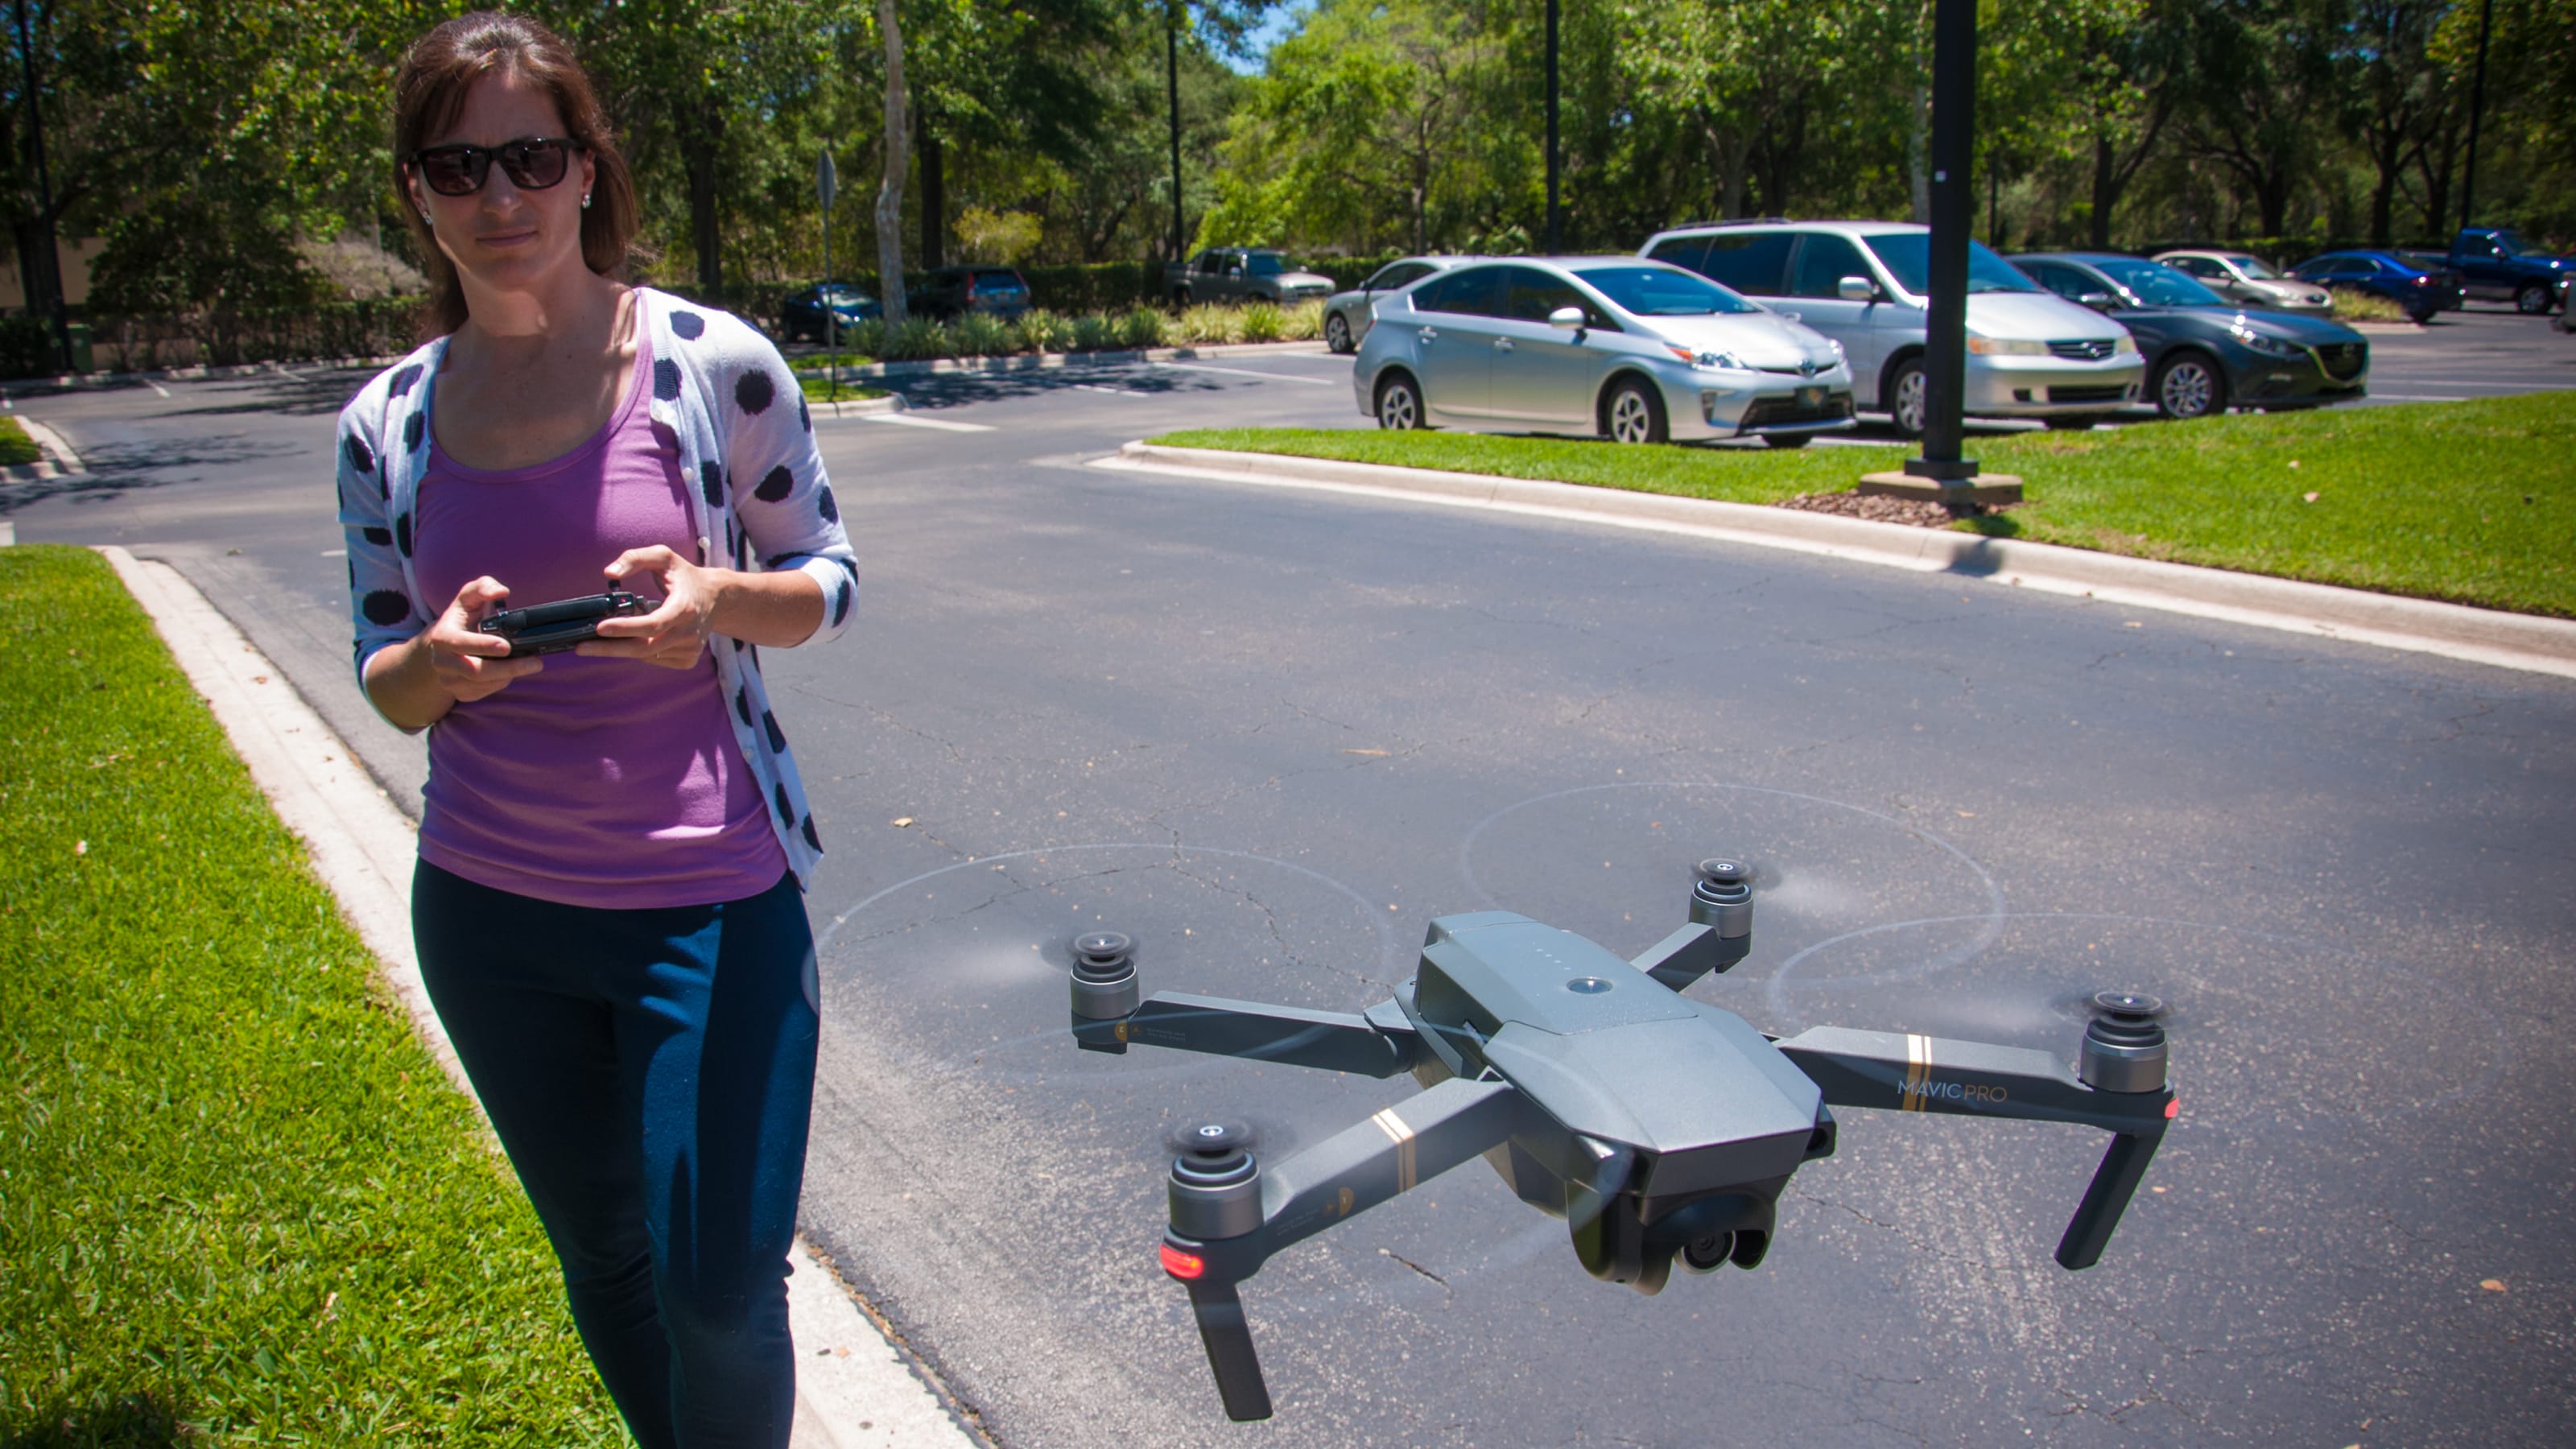 Woman flying a drone in a parking lot.